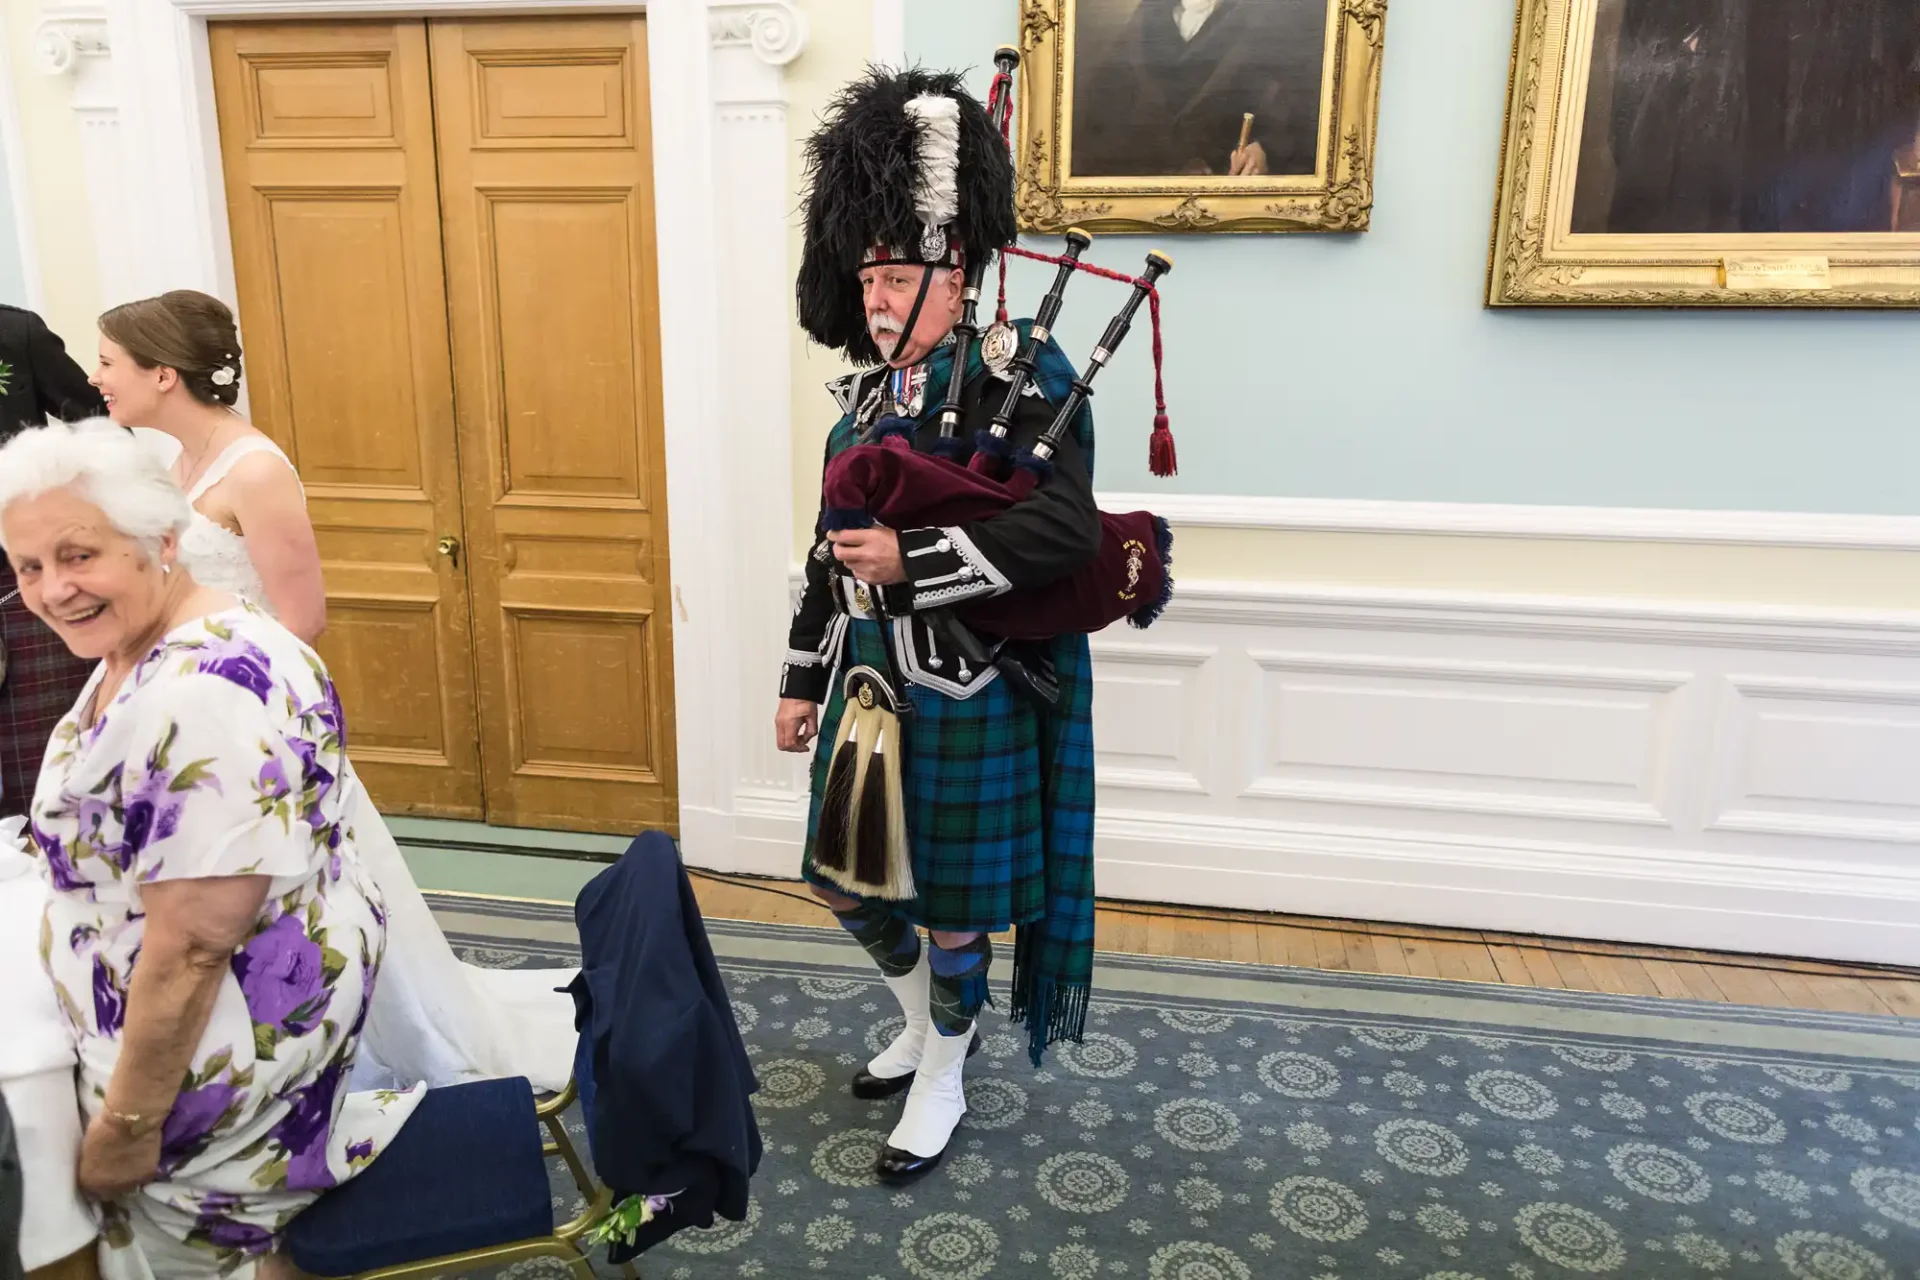 A man in traditional scottish attire, including a kilt and sporran, playing the bagpipes at an indoor event, walking past an elderly woman.